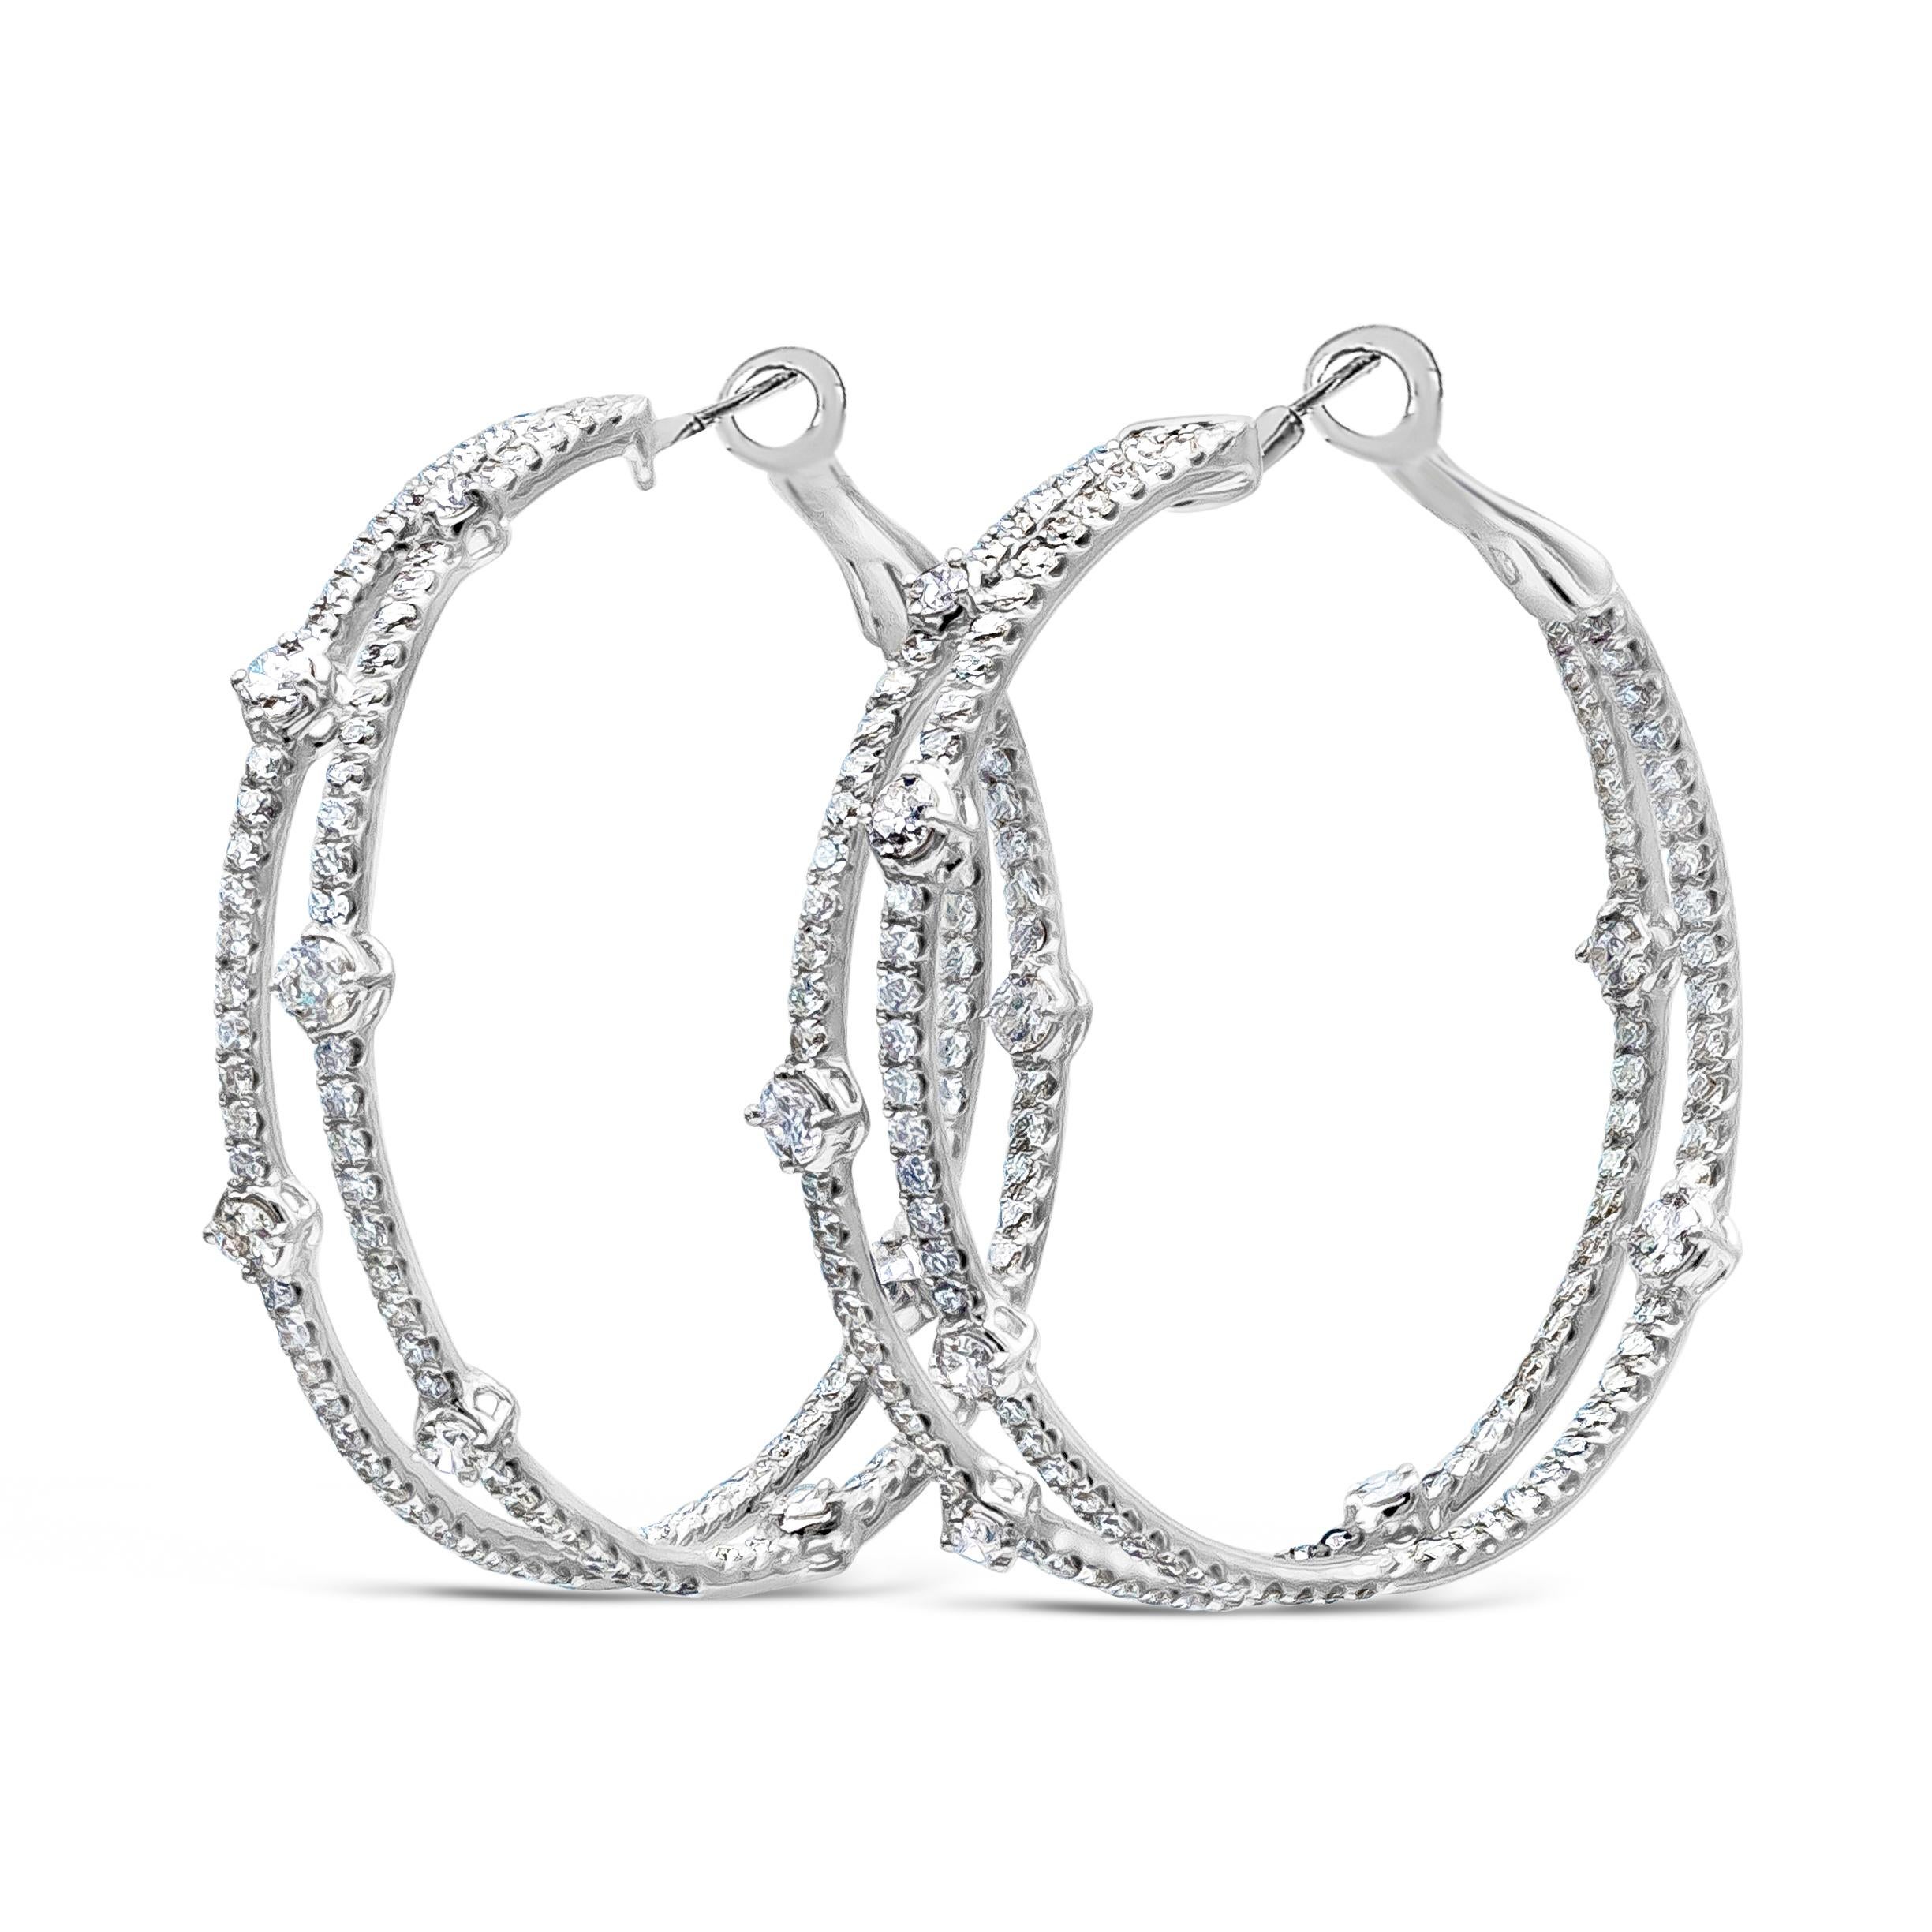 A unique and fashionable pair of hoop earrings showcasing two rows of brilliant round diamonds weighing 4.63 carats total. Made with 18K White Gold. 

Style available in different price ranges. Prices are based on your selection. Please contact us